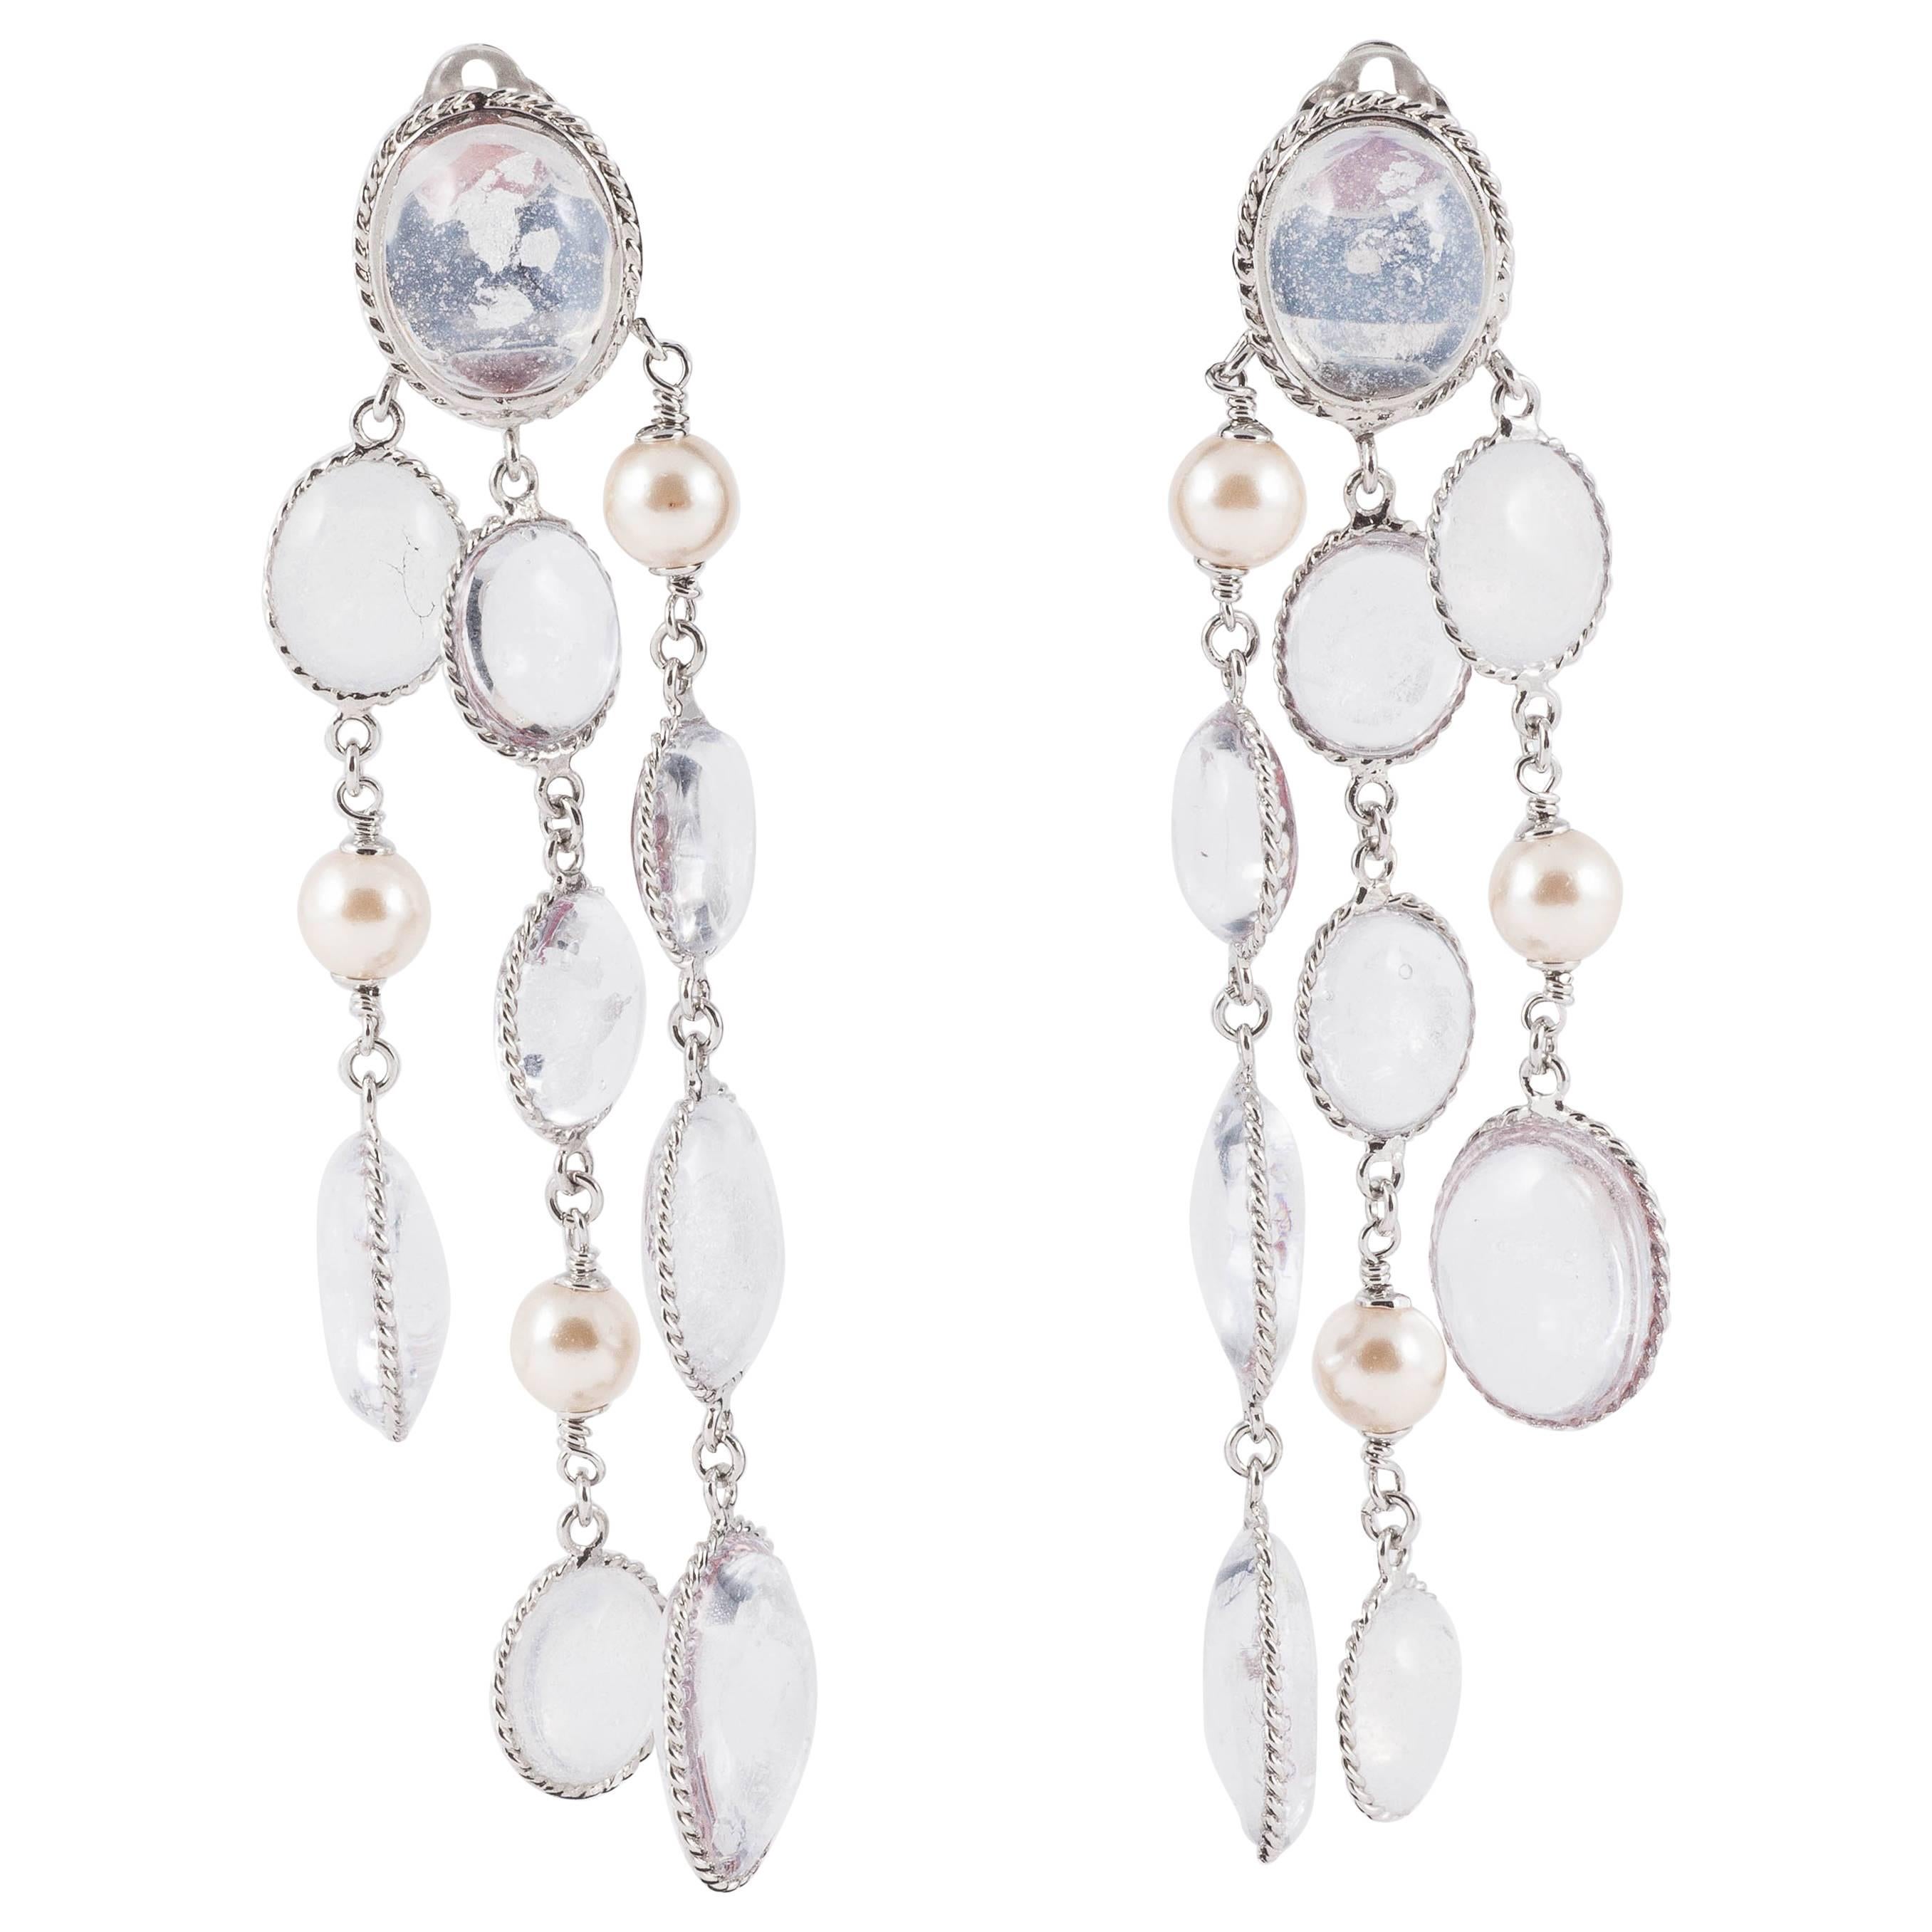 Clear poured glass and silver leaf multi strand drop earrings, WW Collection.